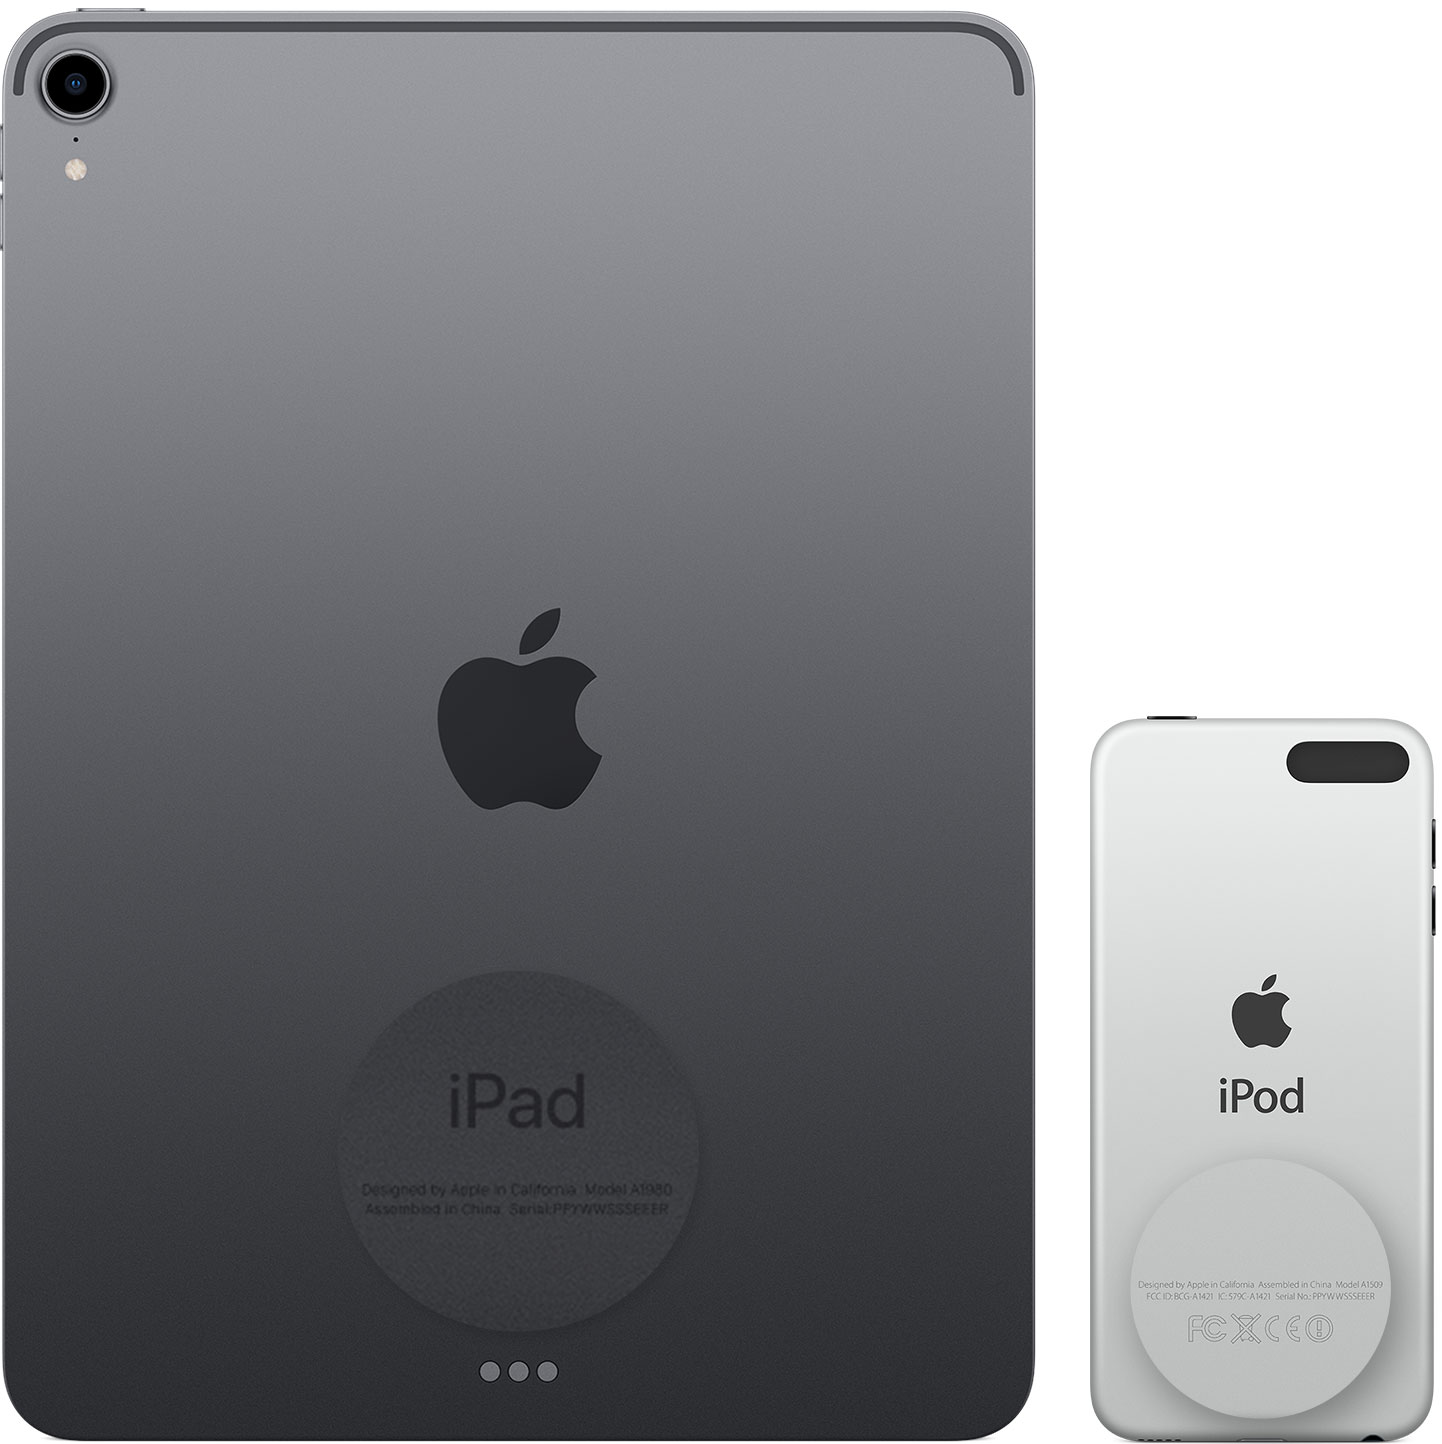 The back of an iPad and iPod touch